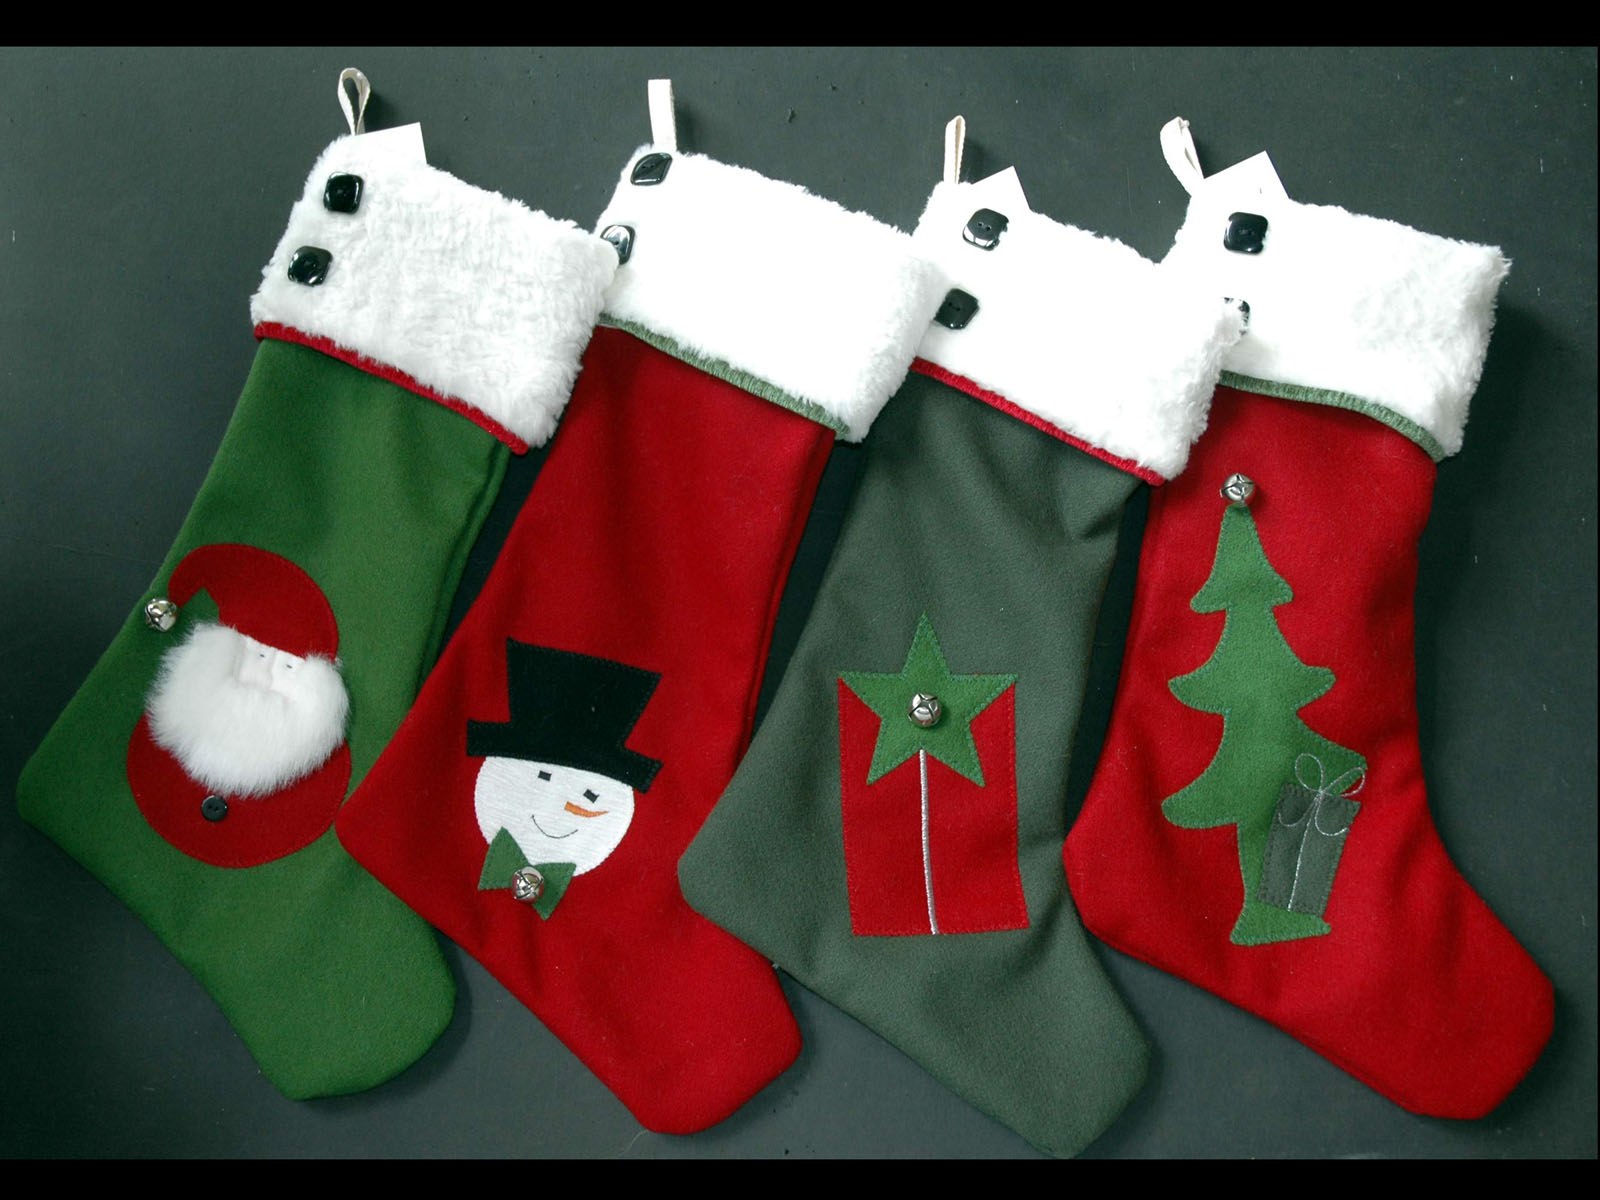 Tag Christmas Stockings Wallpaper Image Photos And Pictures For